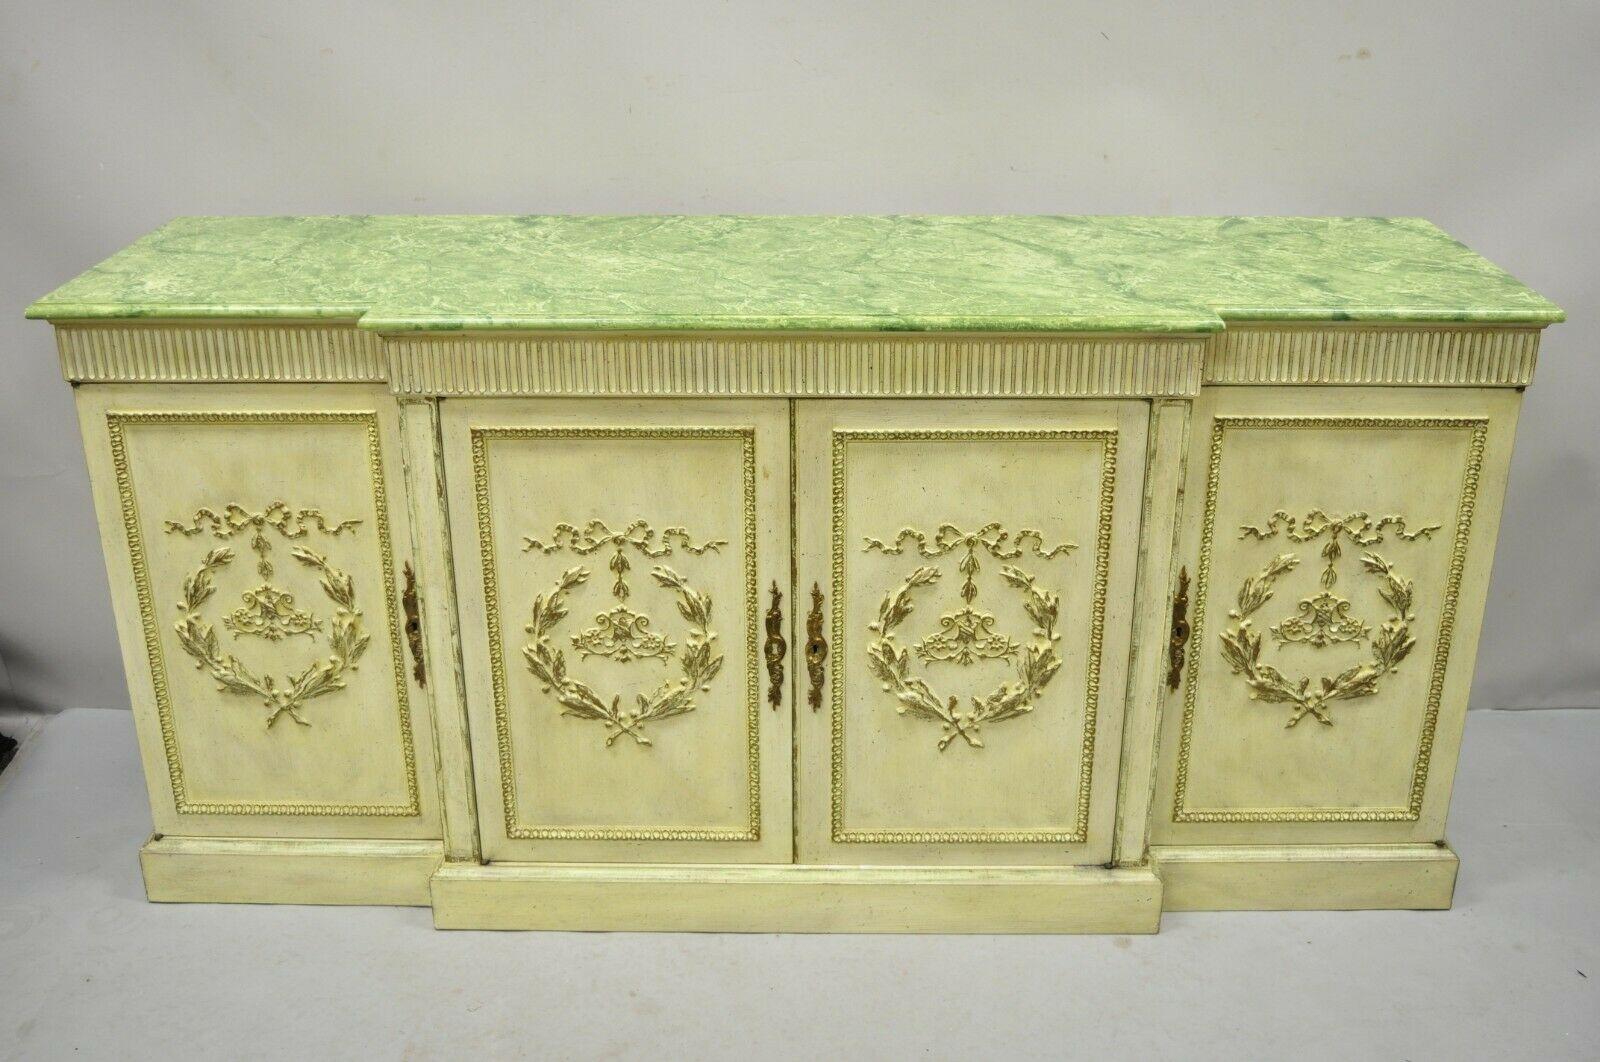 Vintage Italian Neoclassical Buffet Sideboard Credenza Green Faux Marble Top For Sale 4